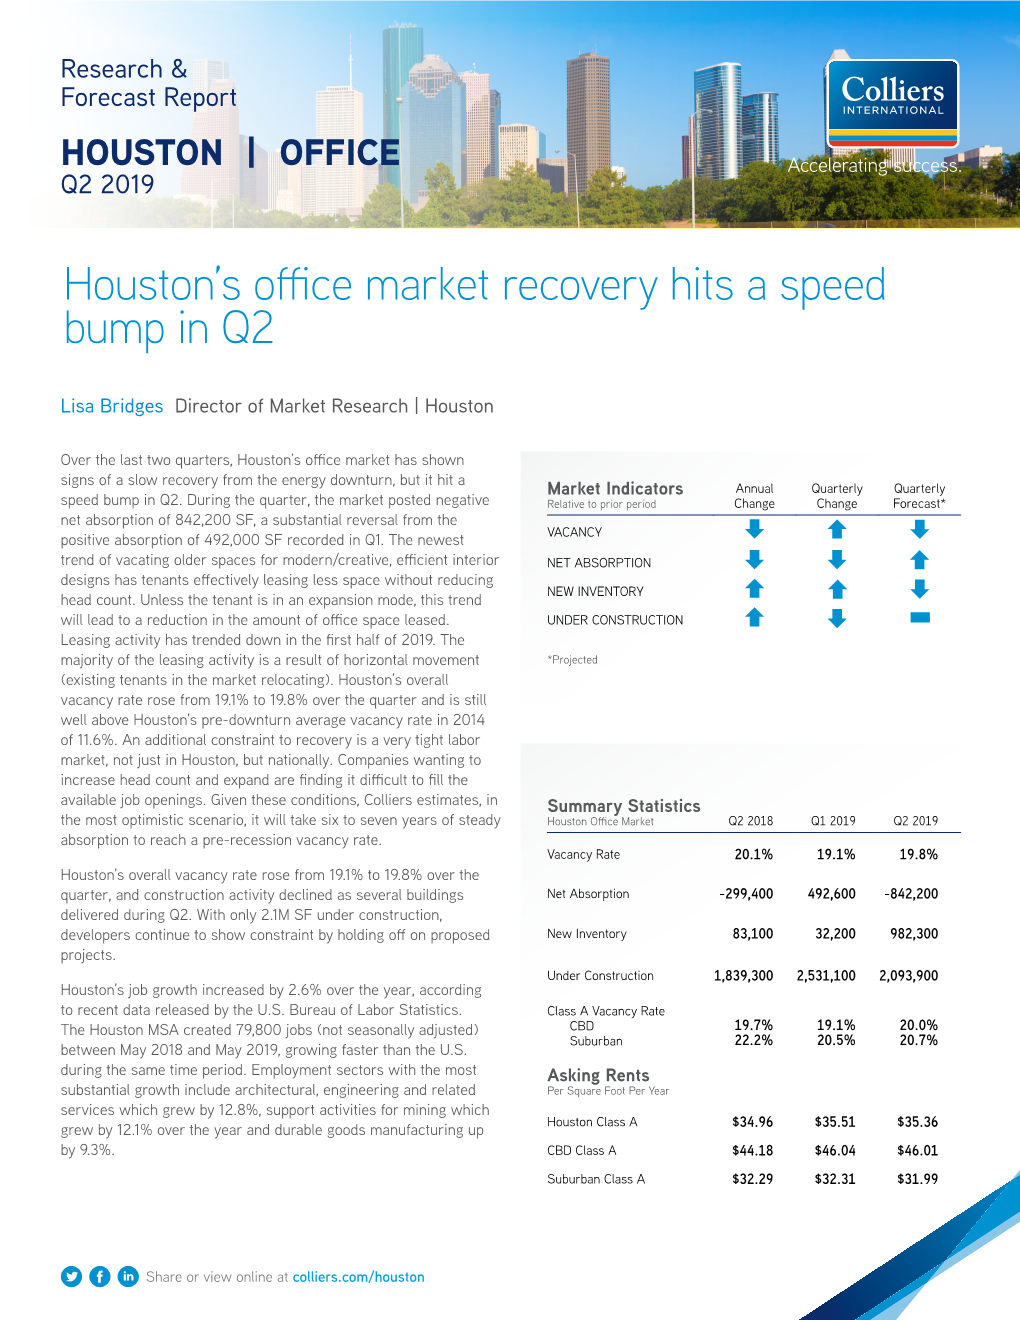 Houston's Office Market Recovery Hits a Speed Bump in Q2